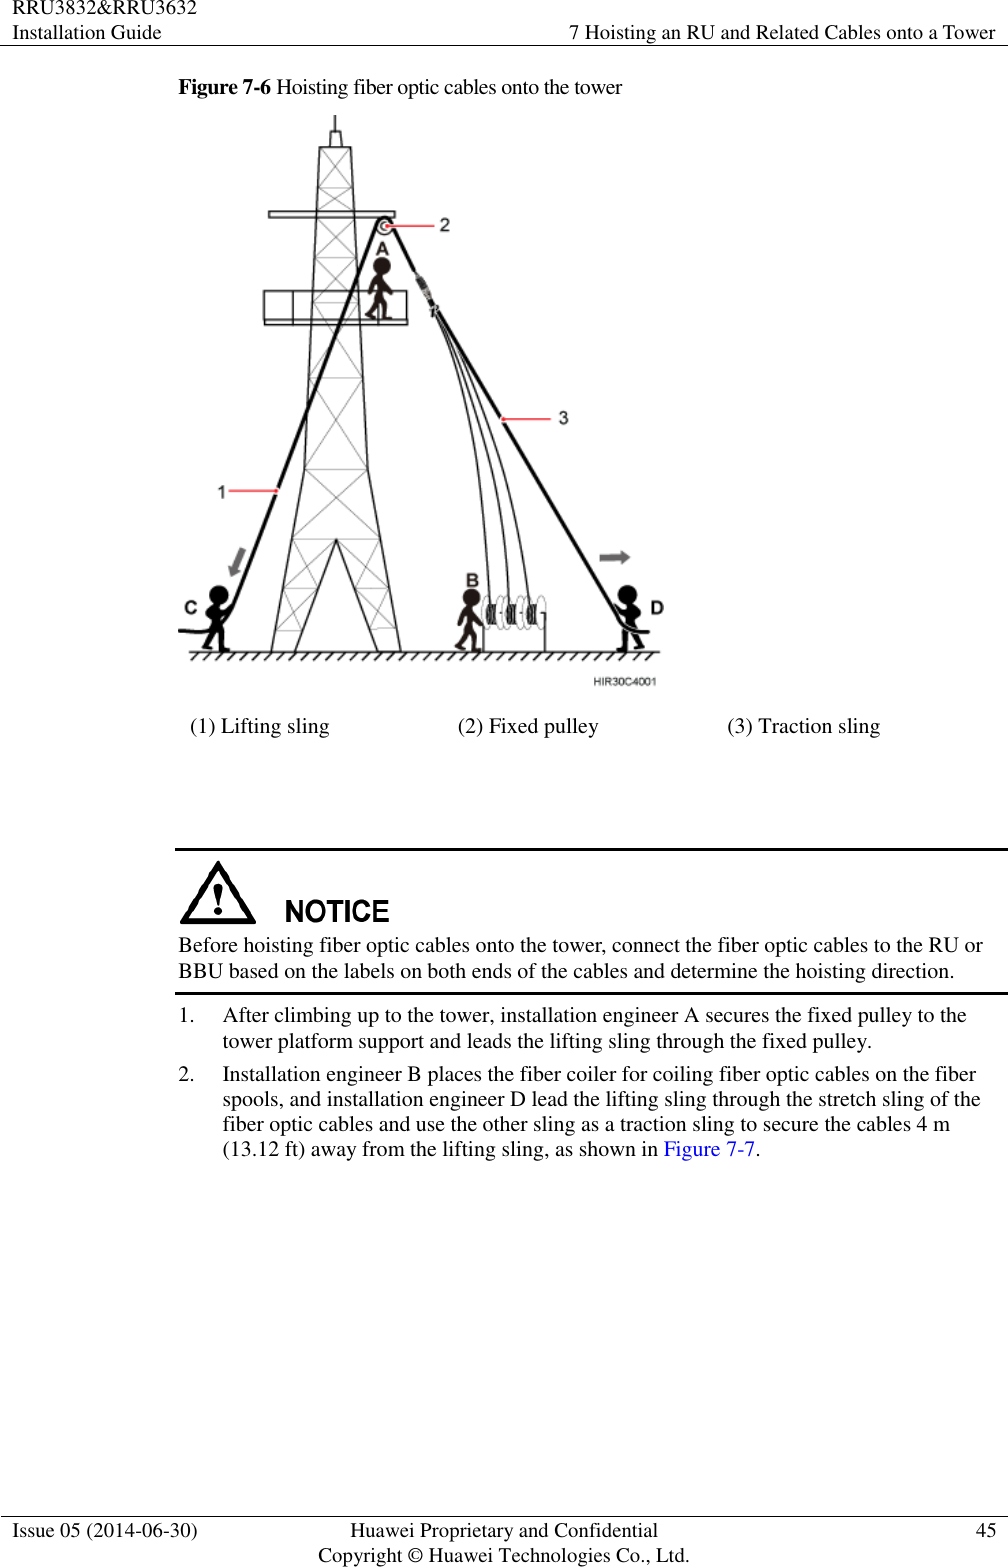 RRU3832&amp;RRU3632 Installation Guide 7 Hoisting an RU and Related Cables onto a Tower  Issue 05 (2014-06-30) Huawei Proprietary and Confidential                                     Copyright © Huawei Technologies Co., Ltd. 45  Figure 7-6 Hoisting fiber optic cables onto the tower  (1) Lifting sling (2) Fixed pulley (3) Traction sling    Before hoisting fiber optic cables onto the tower, connect the fiber optic cables to the RU or BBU based on the labels on both ends of the cables and determine the hoisting direction. 1. After climbing up to the tower, installation engineer A secures the fixed pulley to the tower platform support and leads the lifting sling through the fixed pulley. 2. Installation engineer B places the fiber coiler for coiling fiber optic cables on the fiber spools, and installation engineer D lead the lifting sling through the stretch sling of the fiber optic cables and use the other sling as a traction sling to secure the cables 4 m (13.12 ft) away from the lifting sling, as shown in Figure 7-7. 